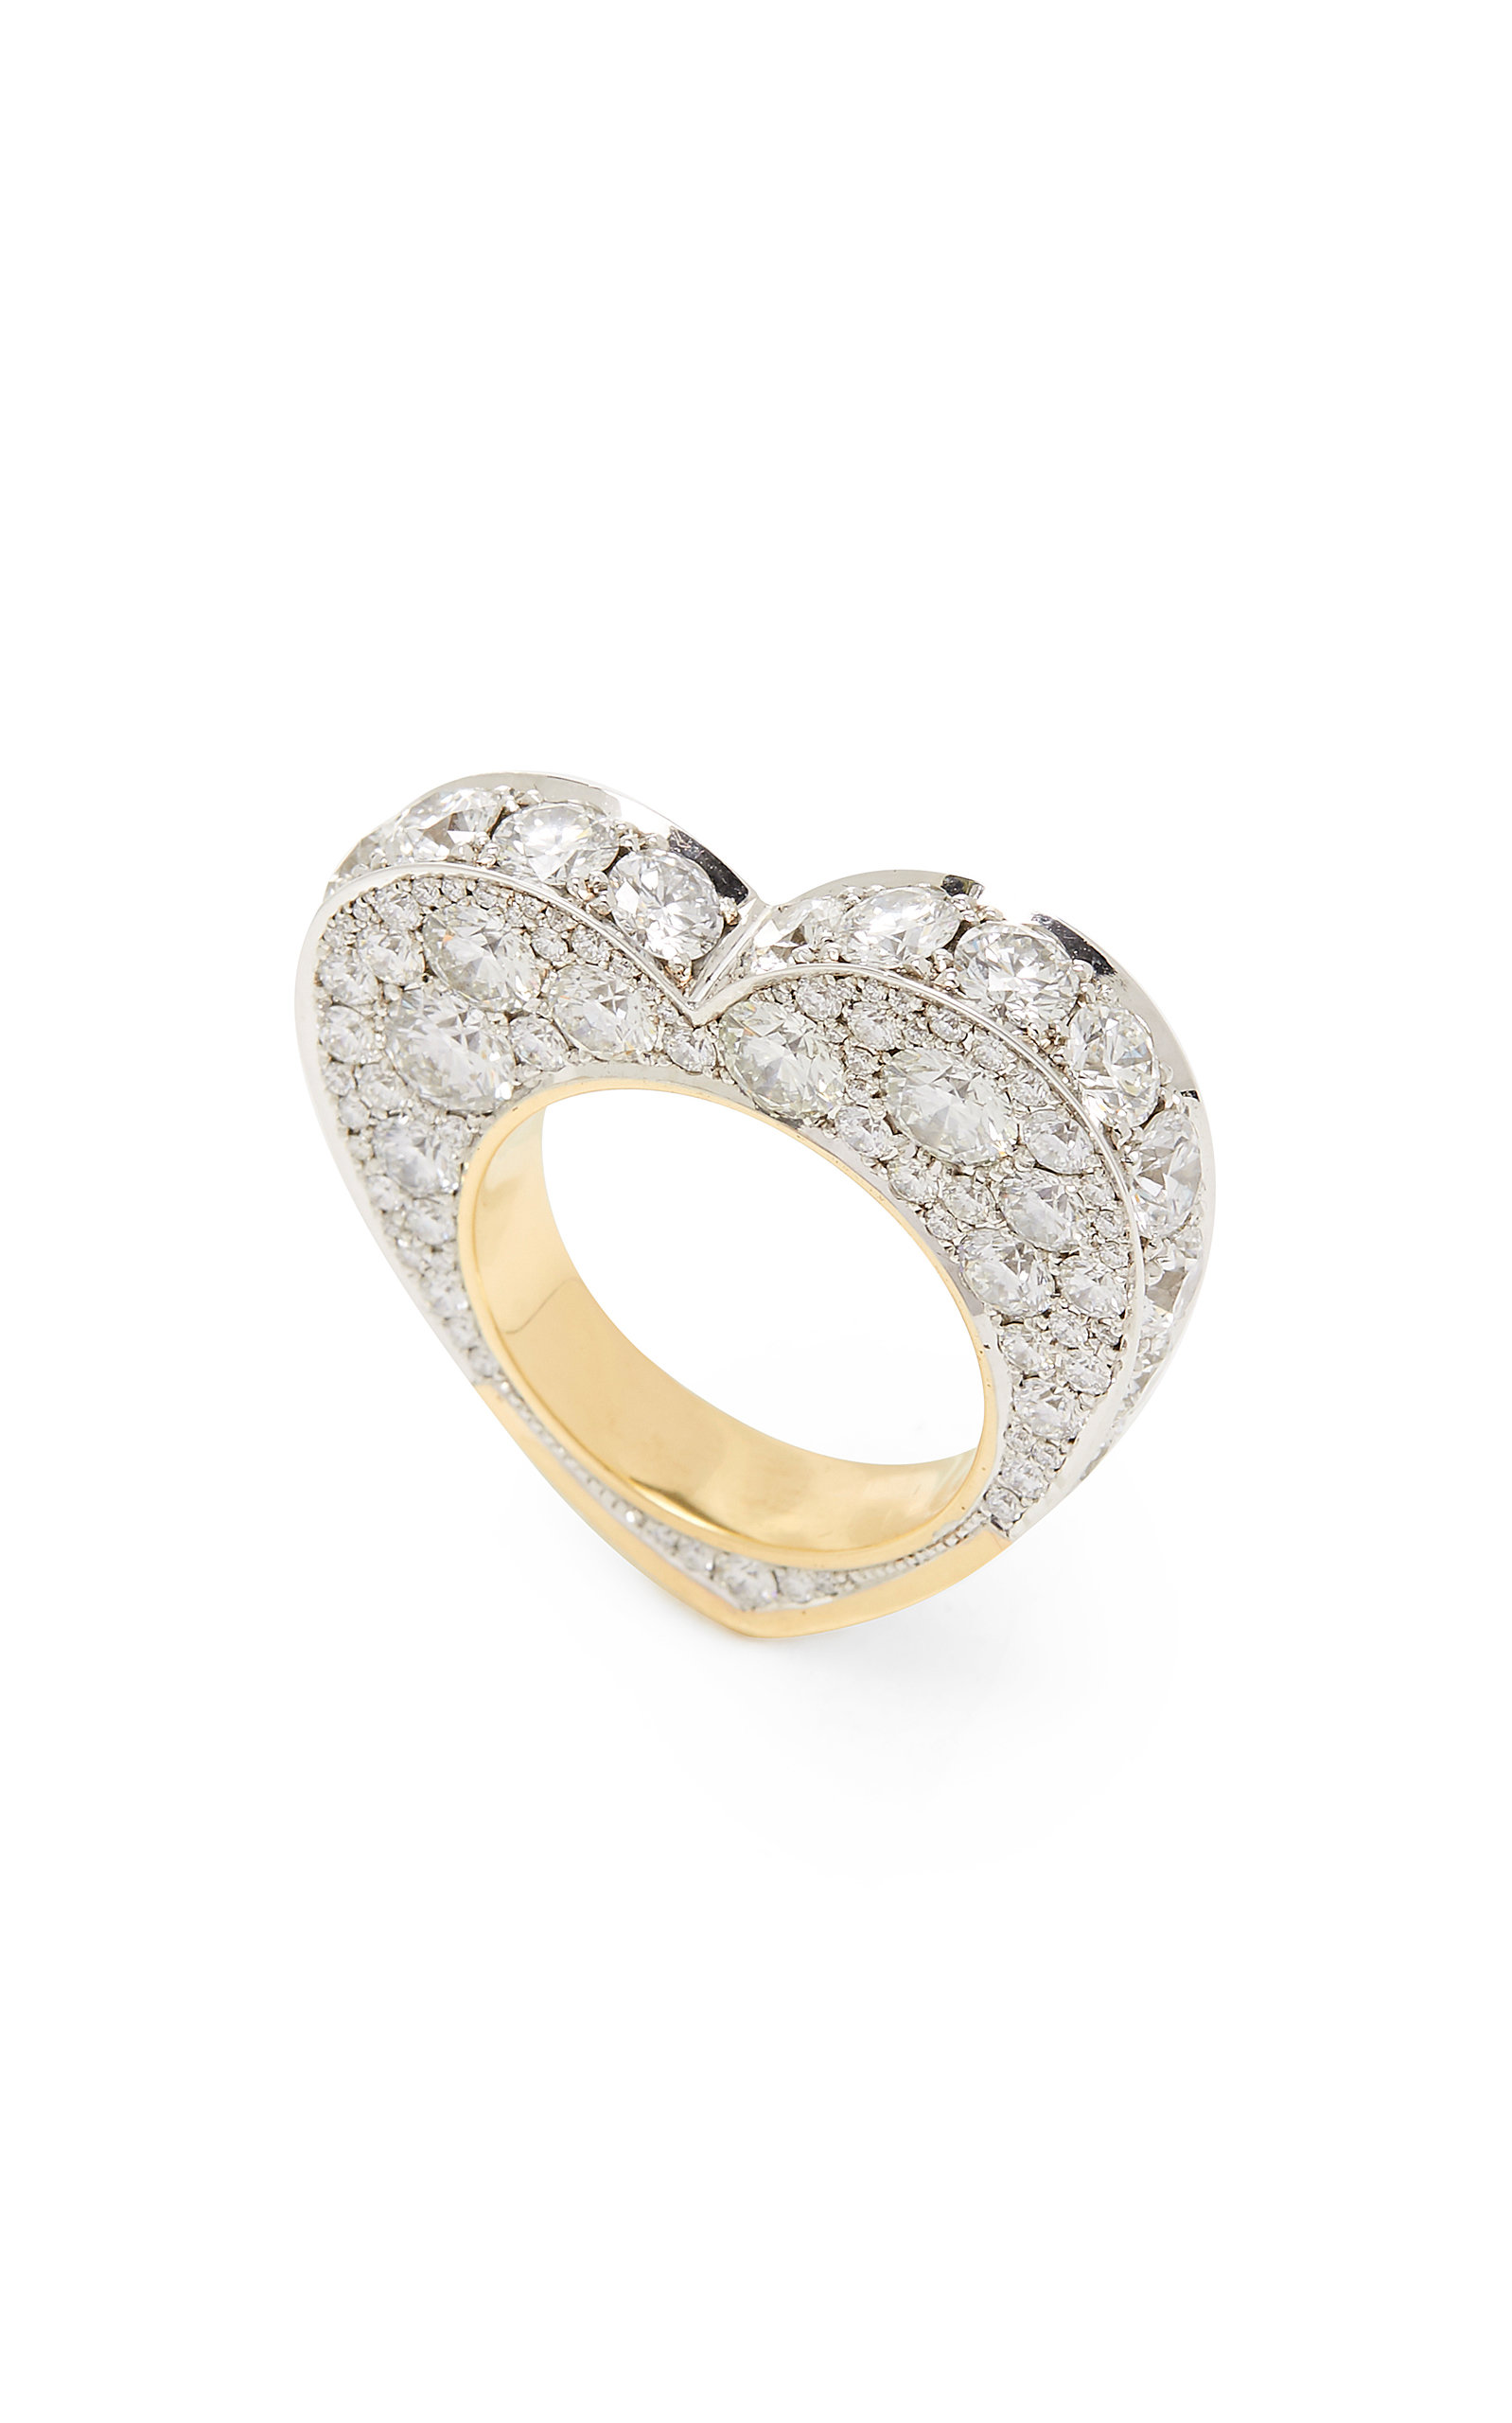 14K White And Yellow Gold And Diamond Ring